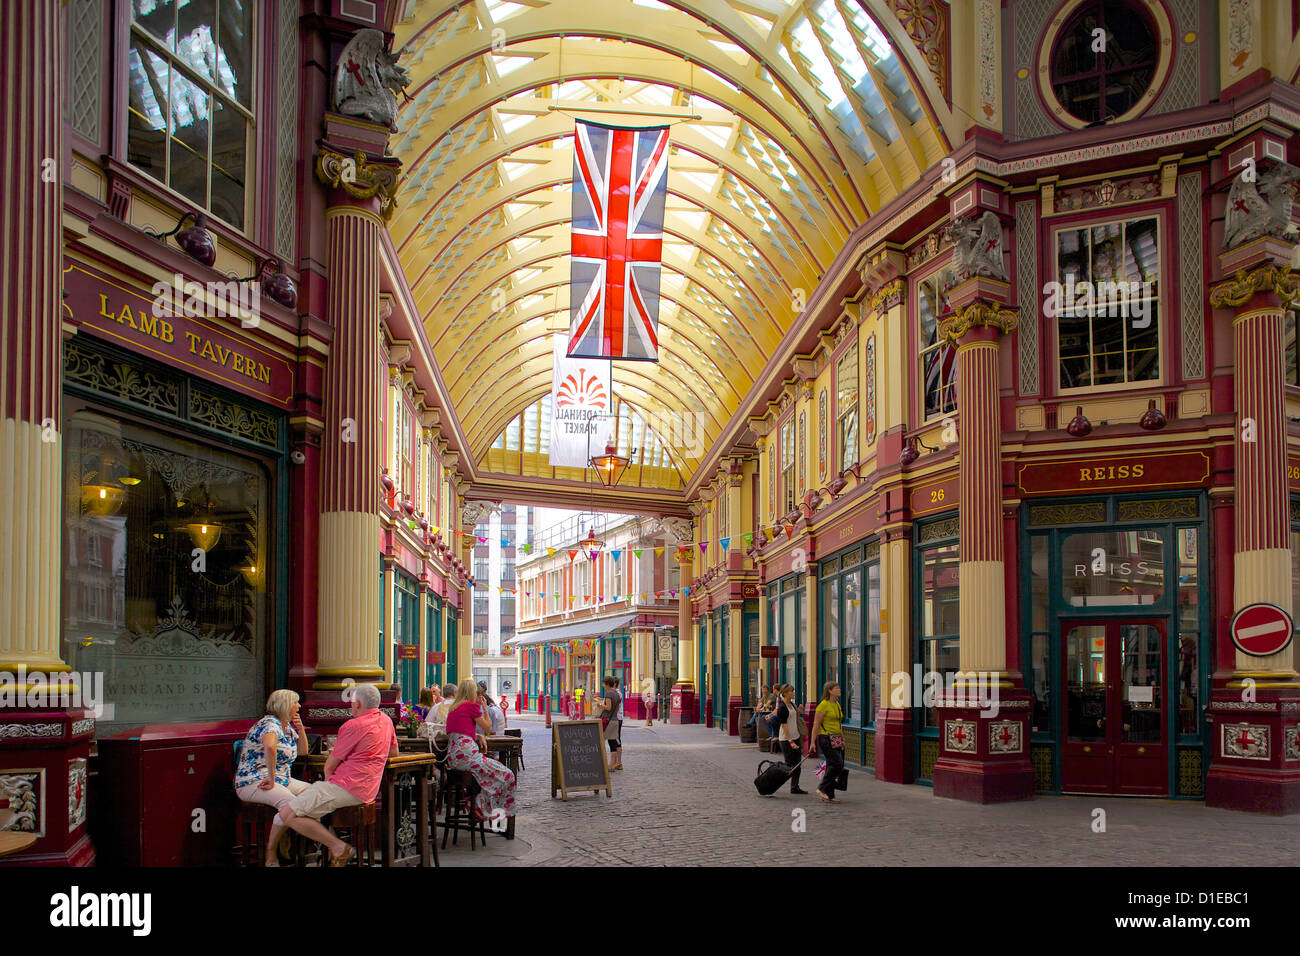 Leadenhall Market, City of London, Londres, Angleterre, Royaume-Uni, Europe Banque D'Images